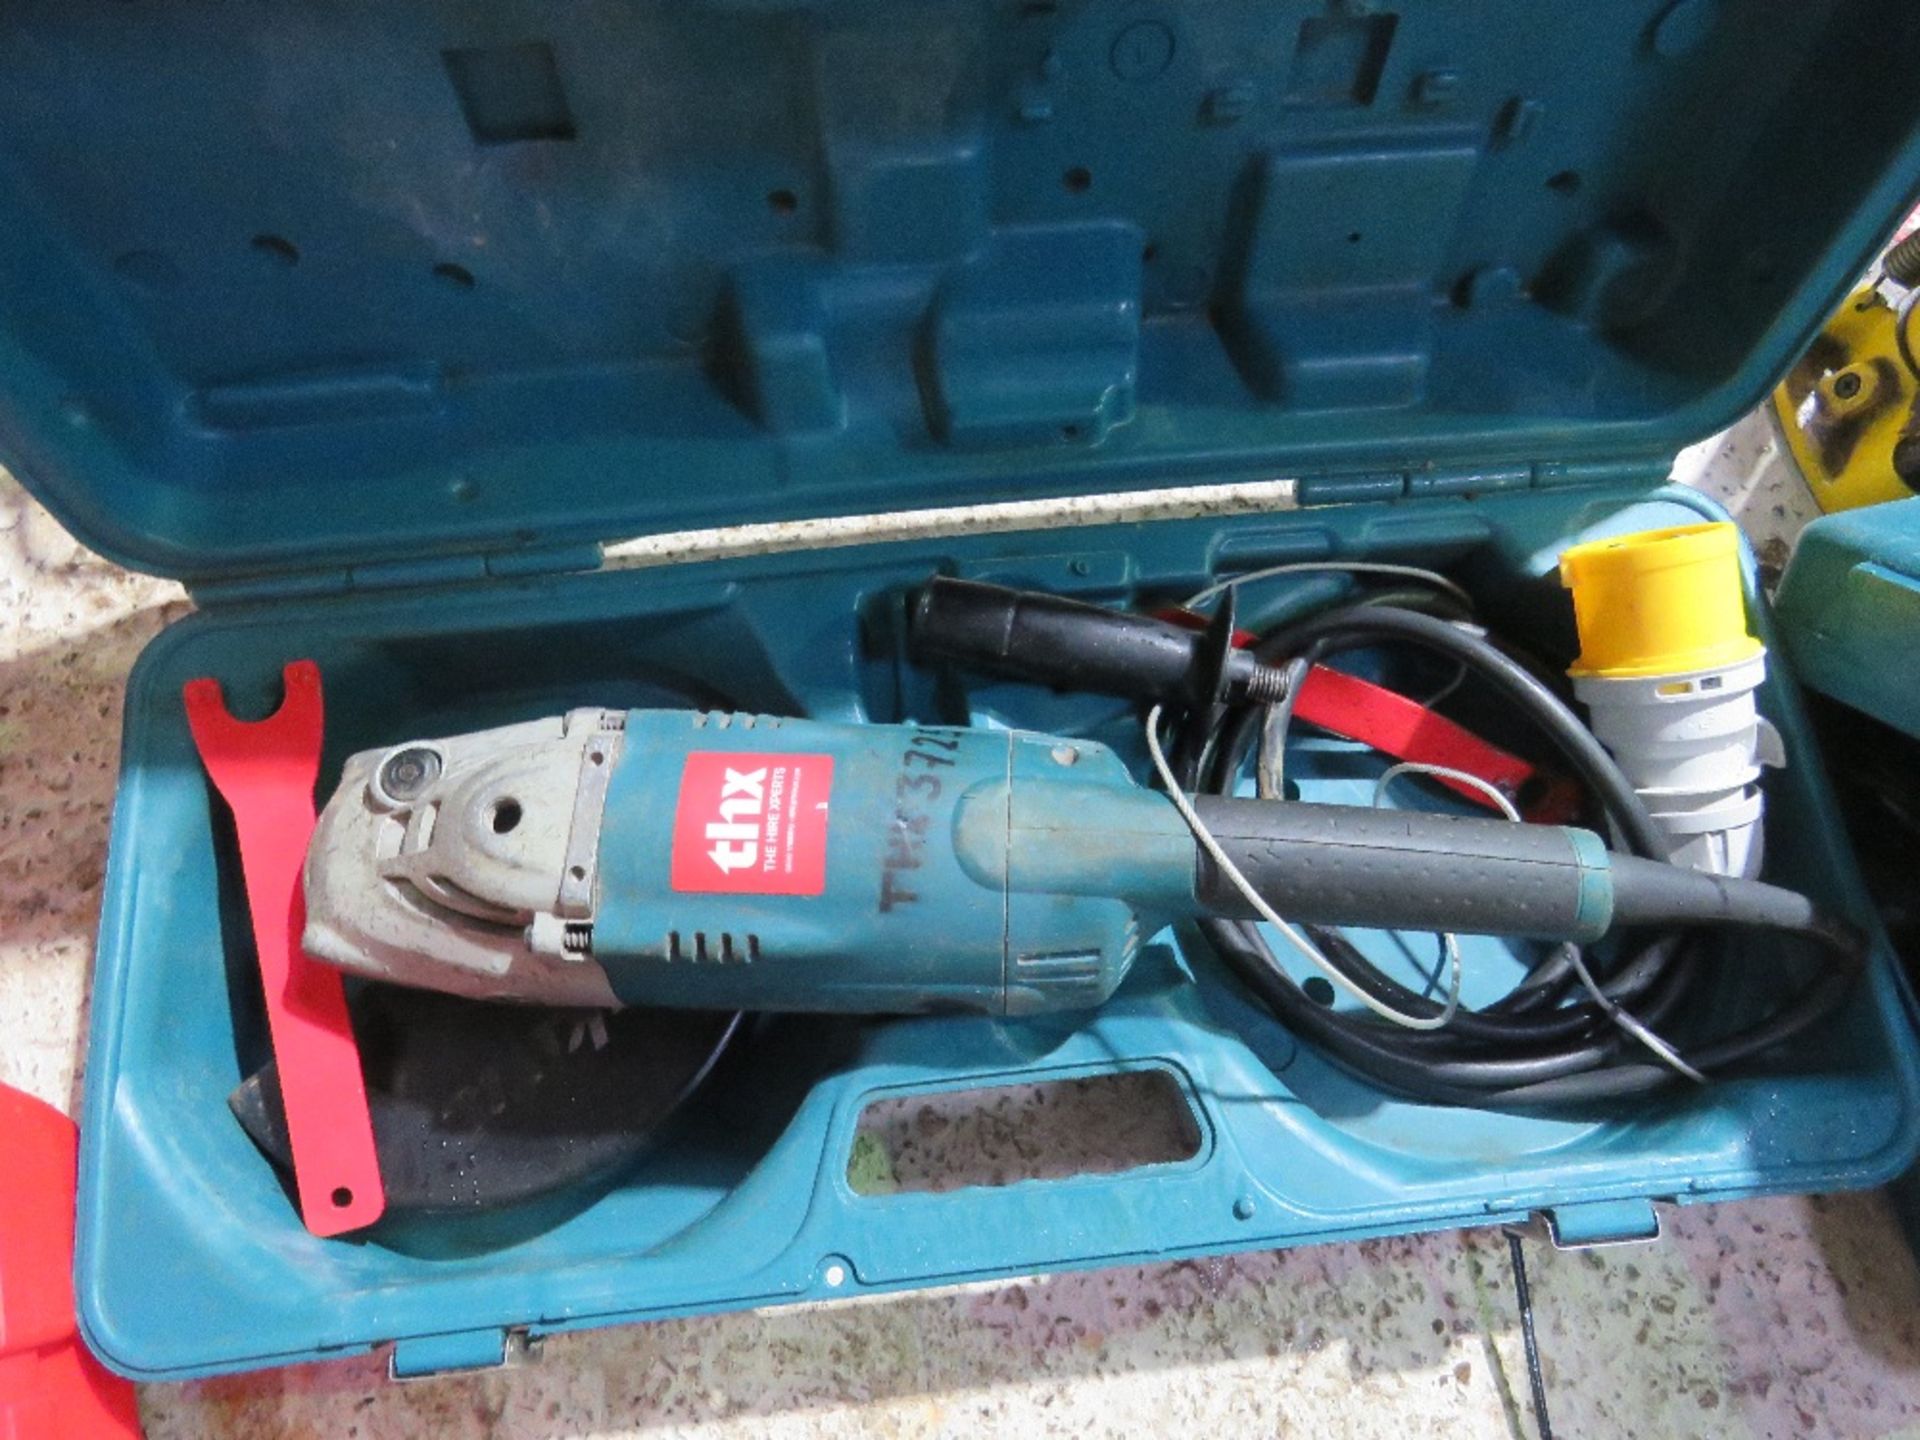 MAKITA 110VOLT ANGLE GRINDER IN A CASE THX3725